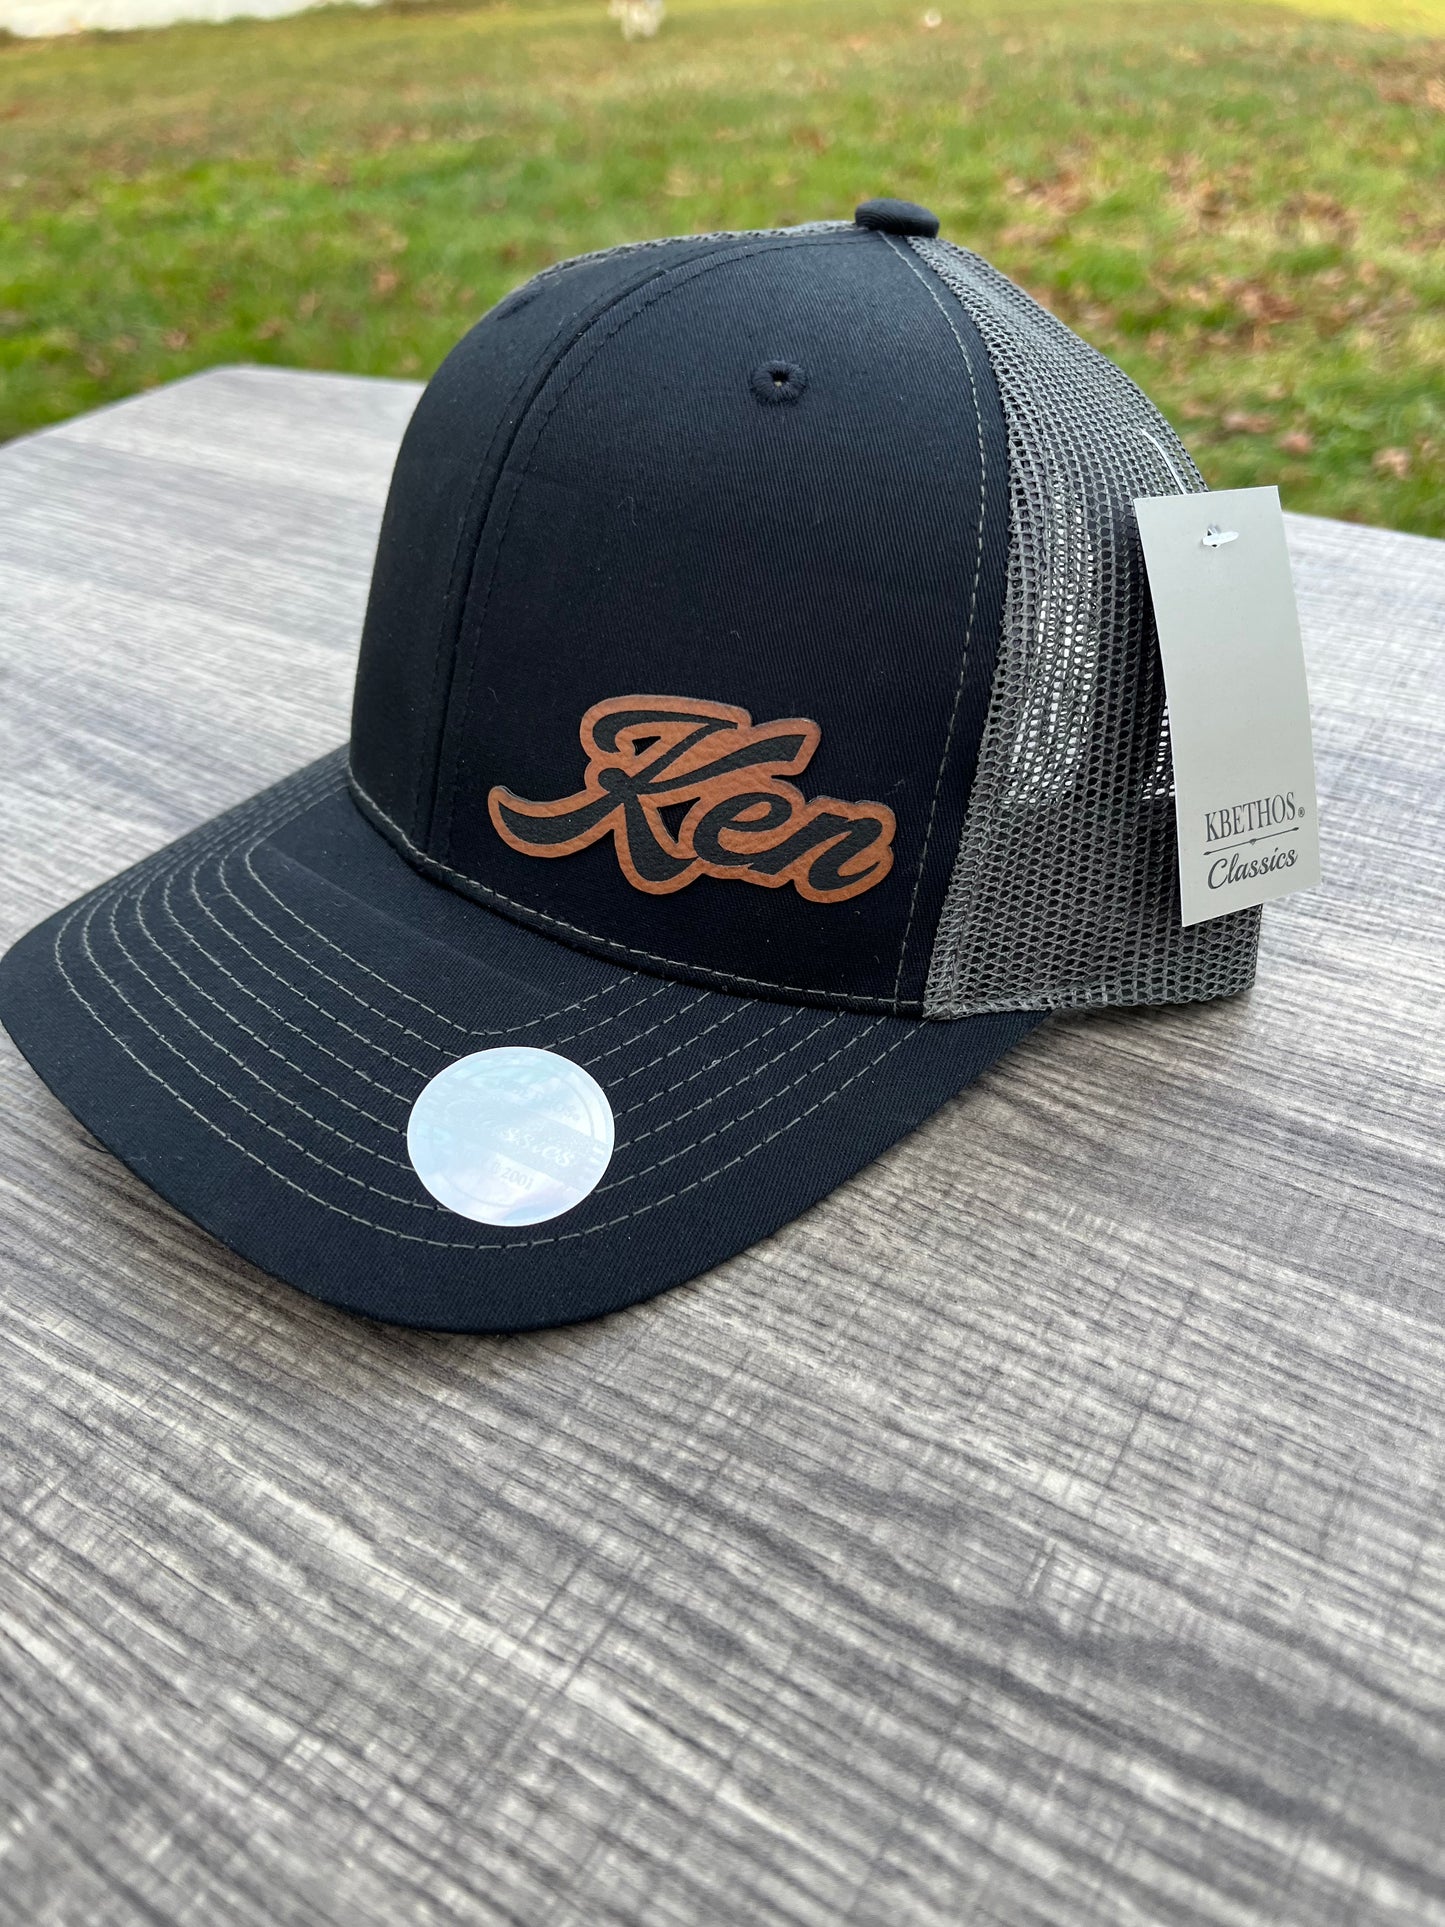 Personalized trucker hat leather patch in black / gray